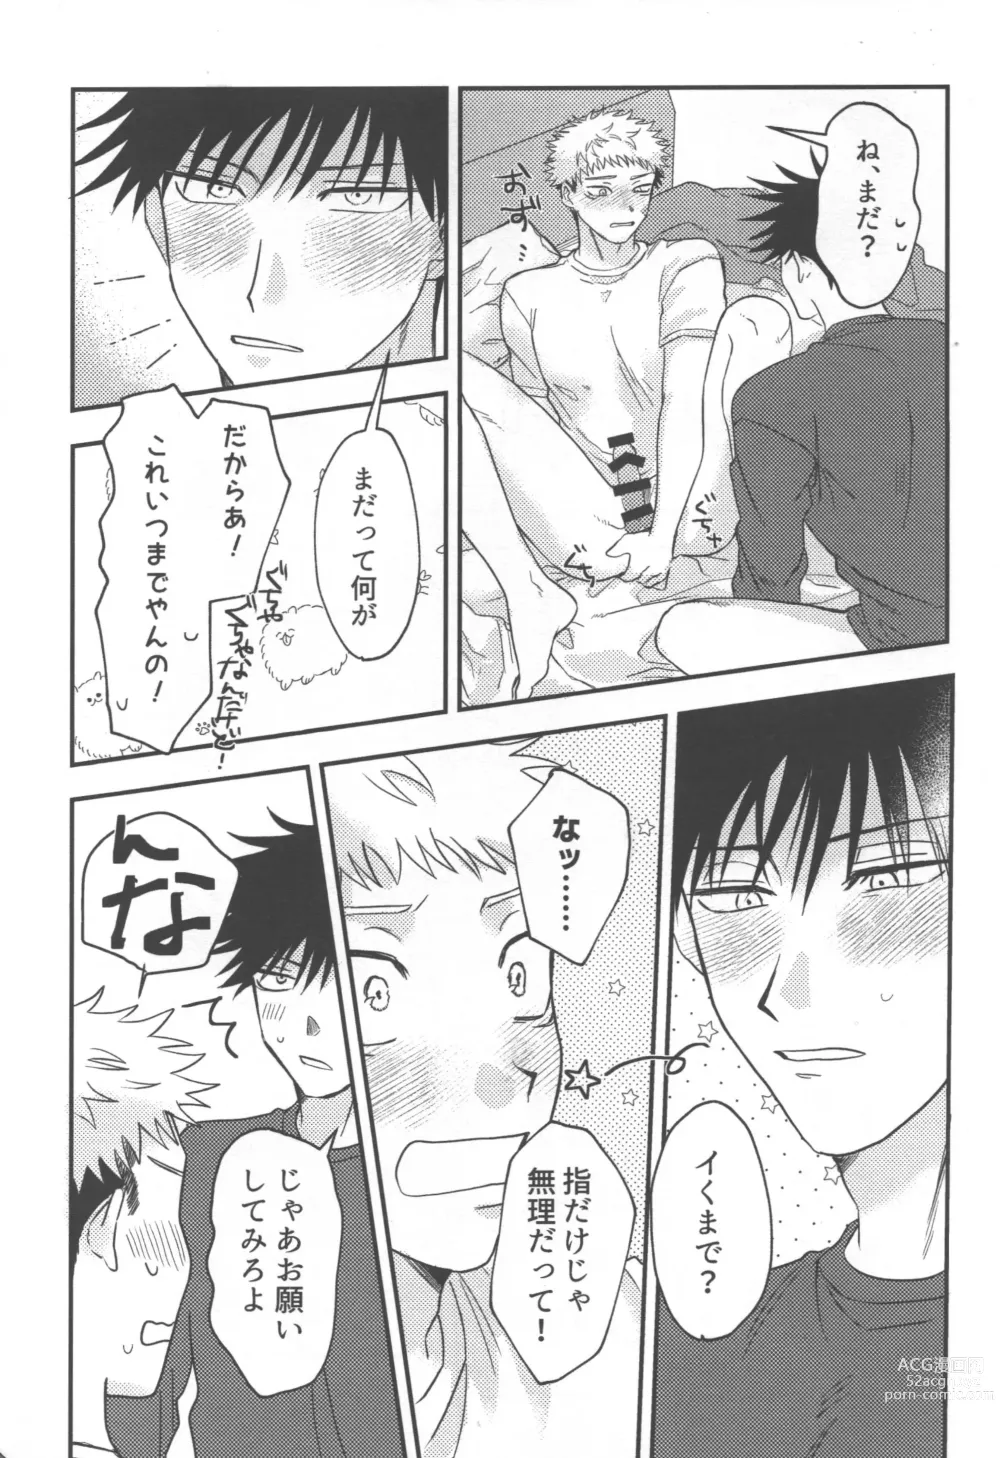 Page 26 of doujinshi Dont Look at ME Like That.